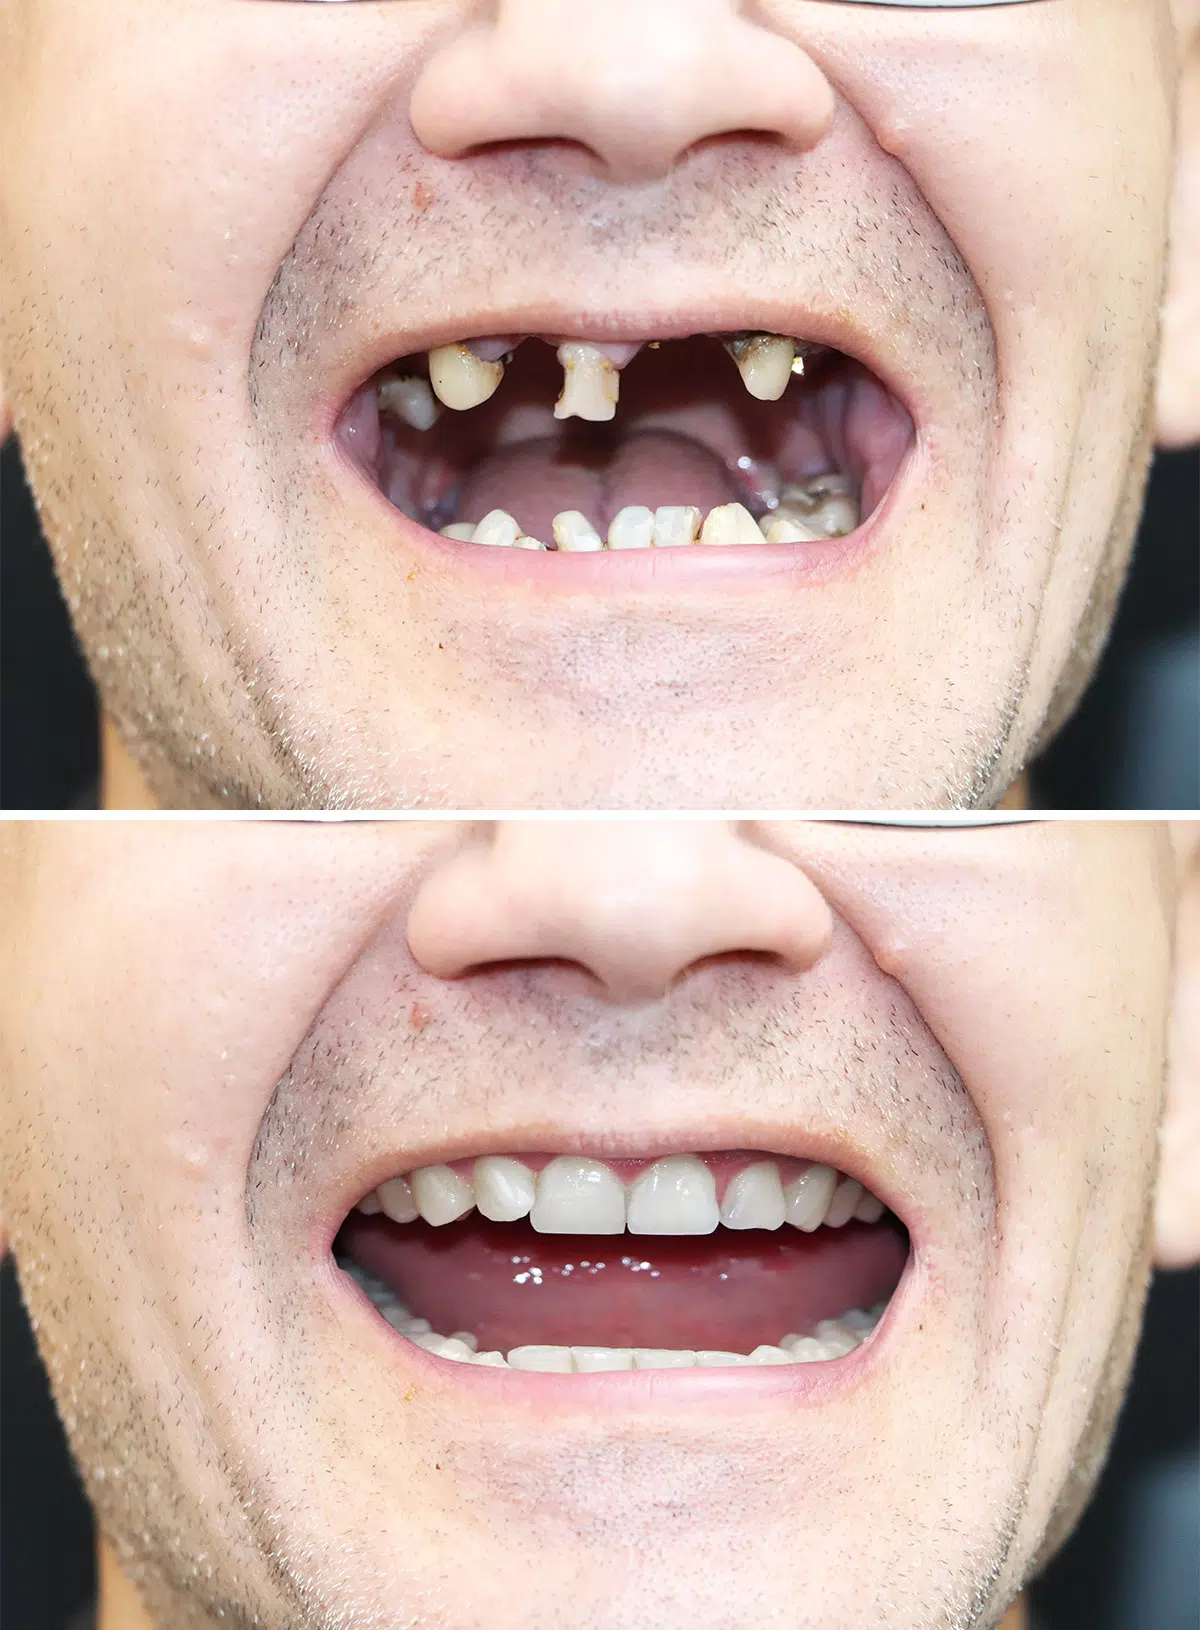 Male Dental Implant Before and After Photos | Smiles of Chandler in Chandler, AZ